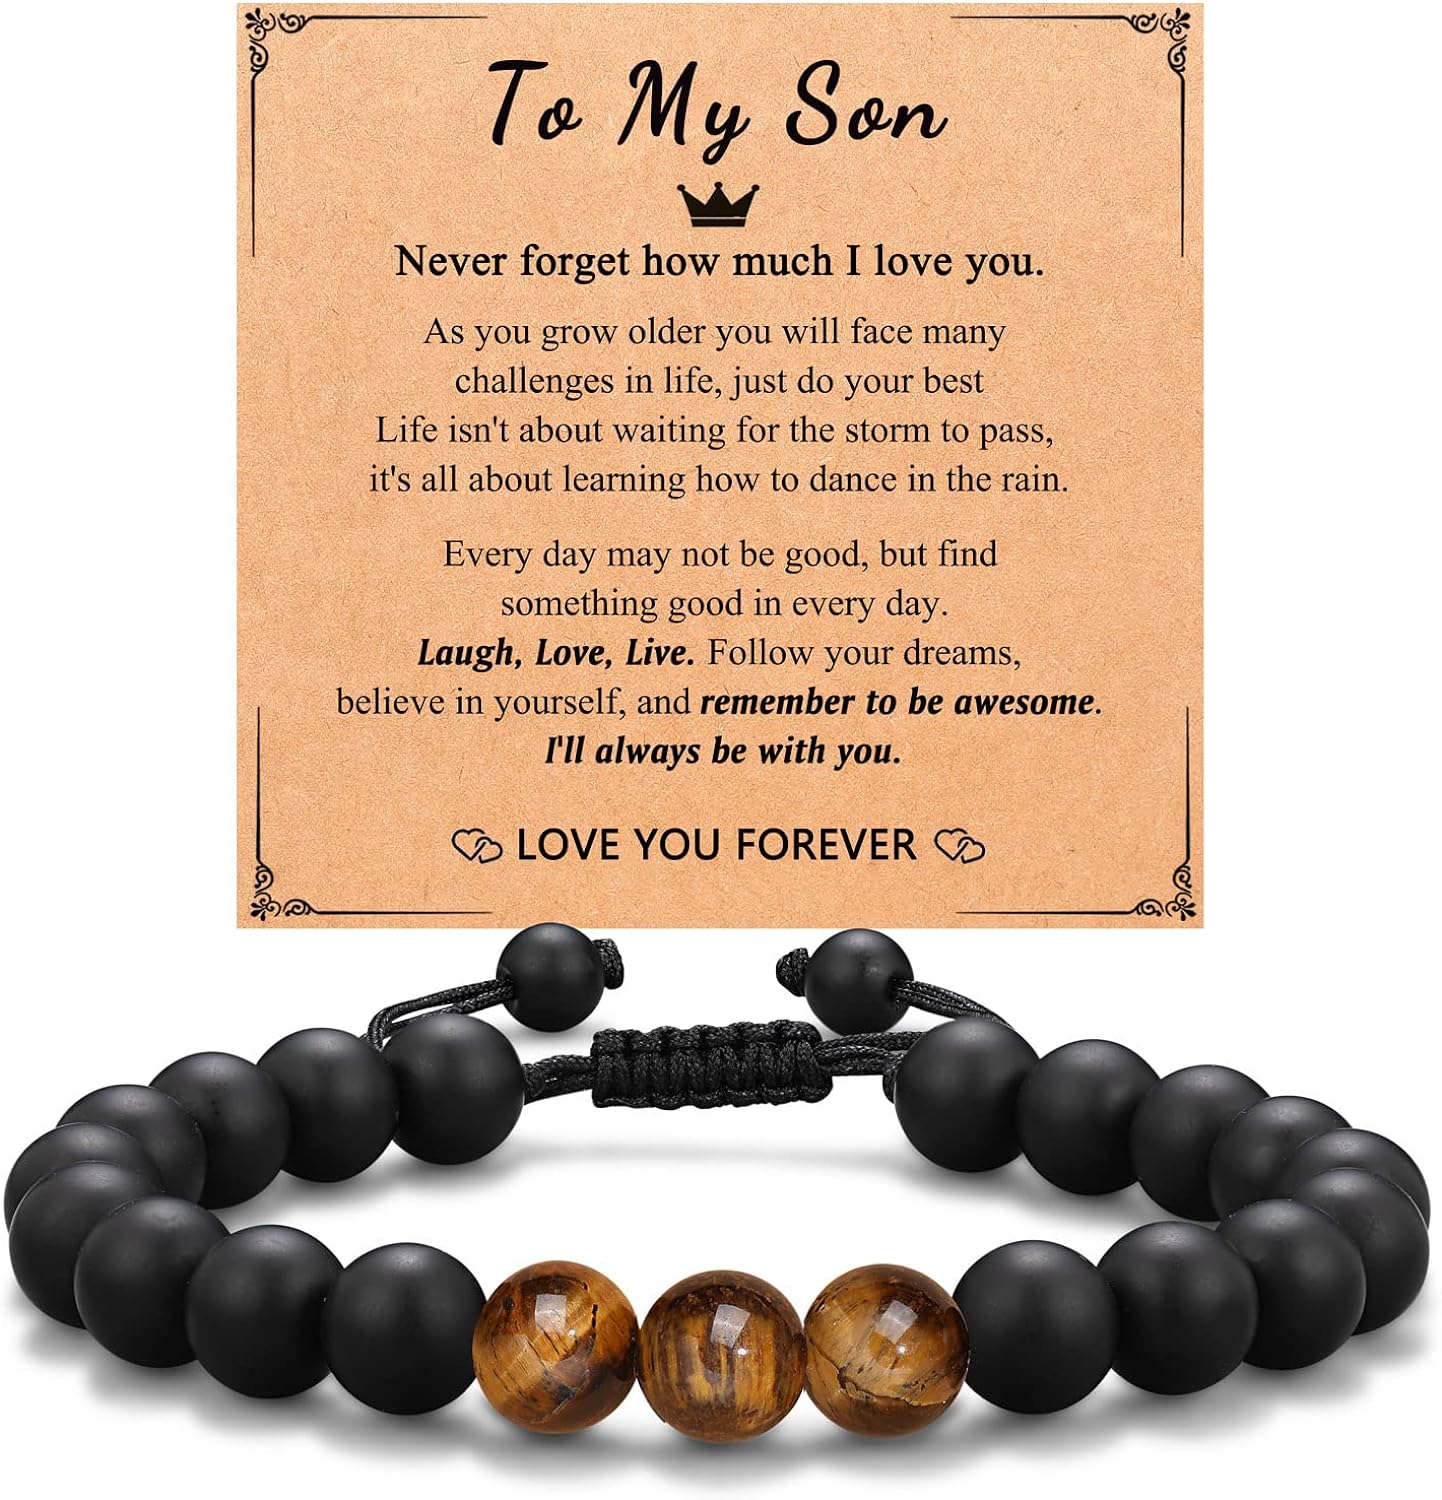 To My Man Bracelet Gifts for Boyfriend Husband Dad Son Uncle Grandpa Brother Fiance Anniversary Birthday Christmas Father's Day Gift for Men Boys Him